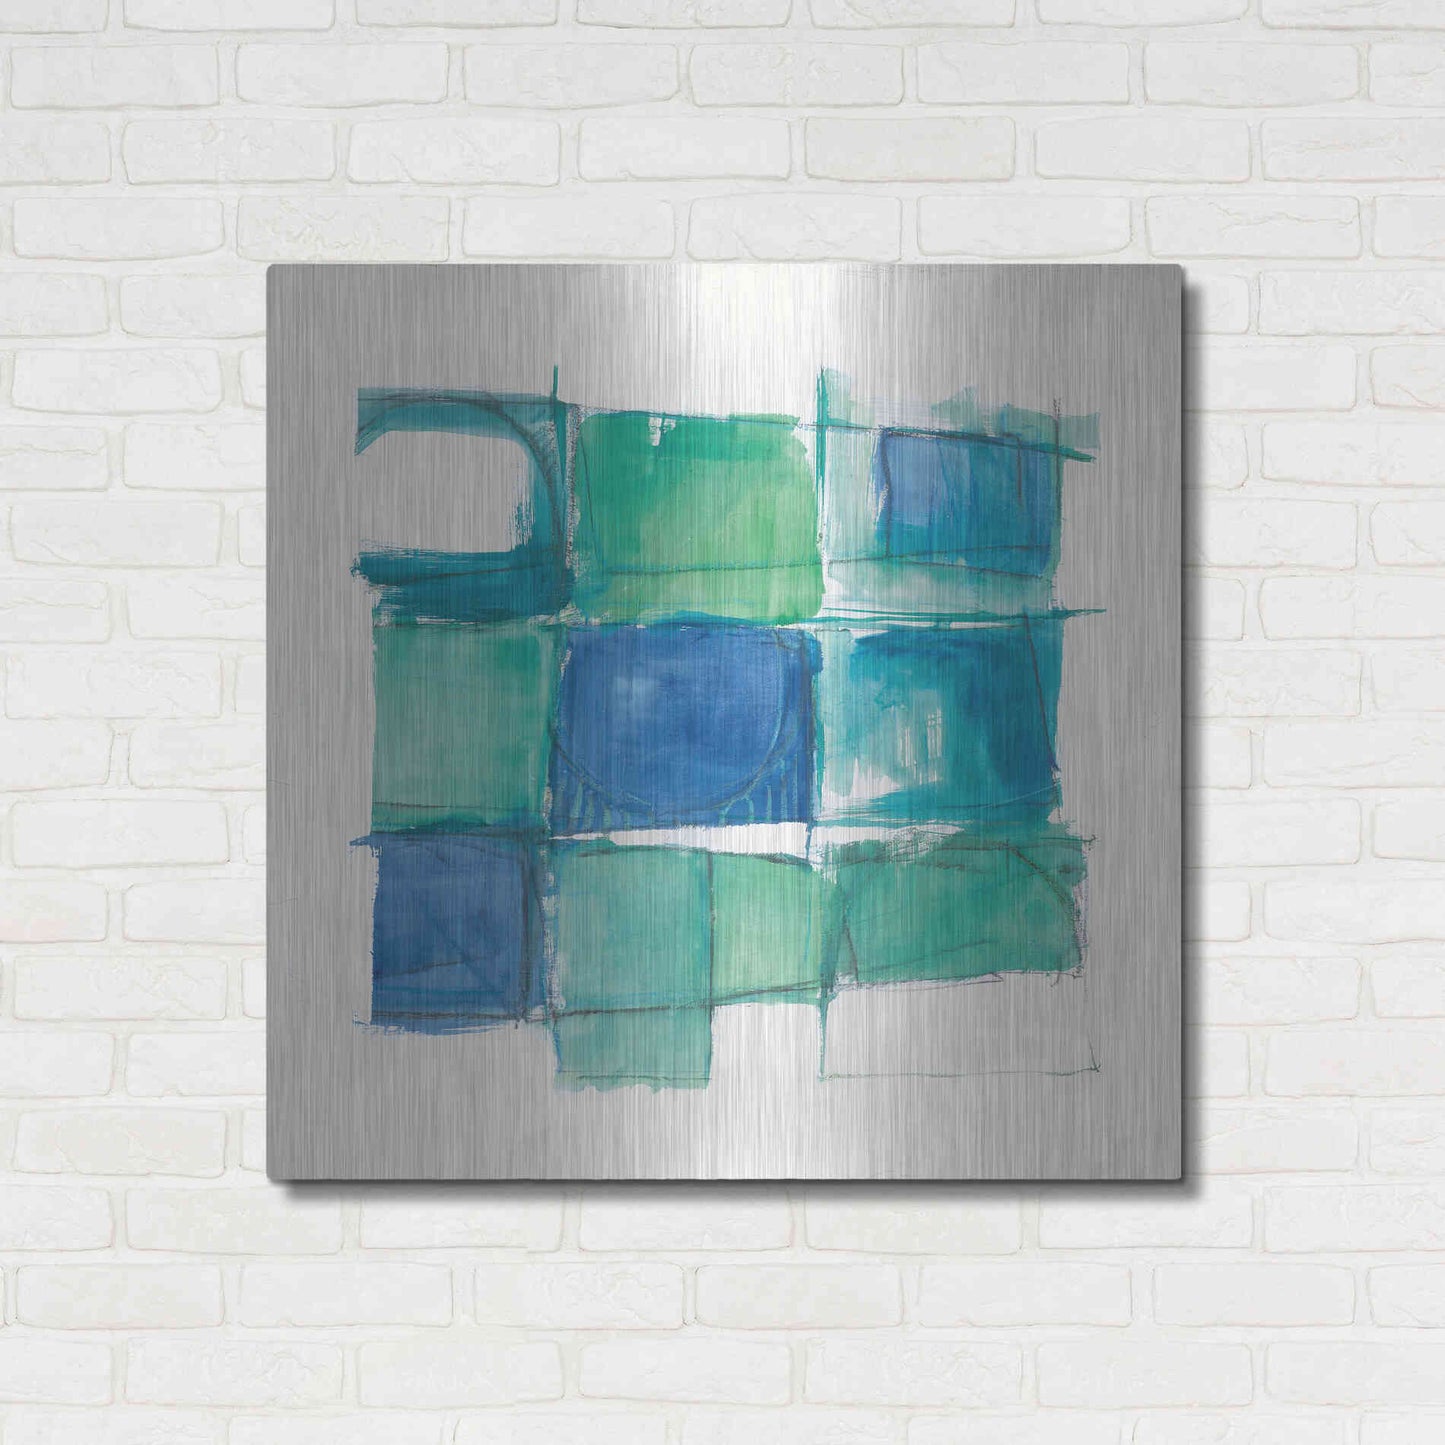 Luxe Metal Art '131 West 3rd Street Square II On White' by Mike Schick, Metal Wall Art,36x36